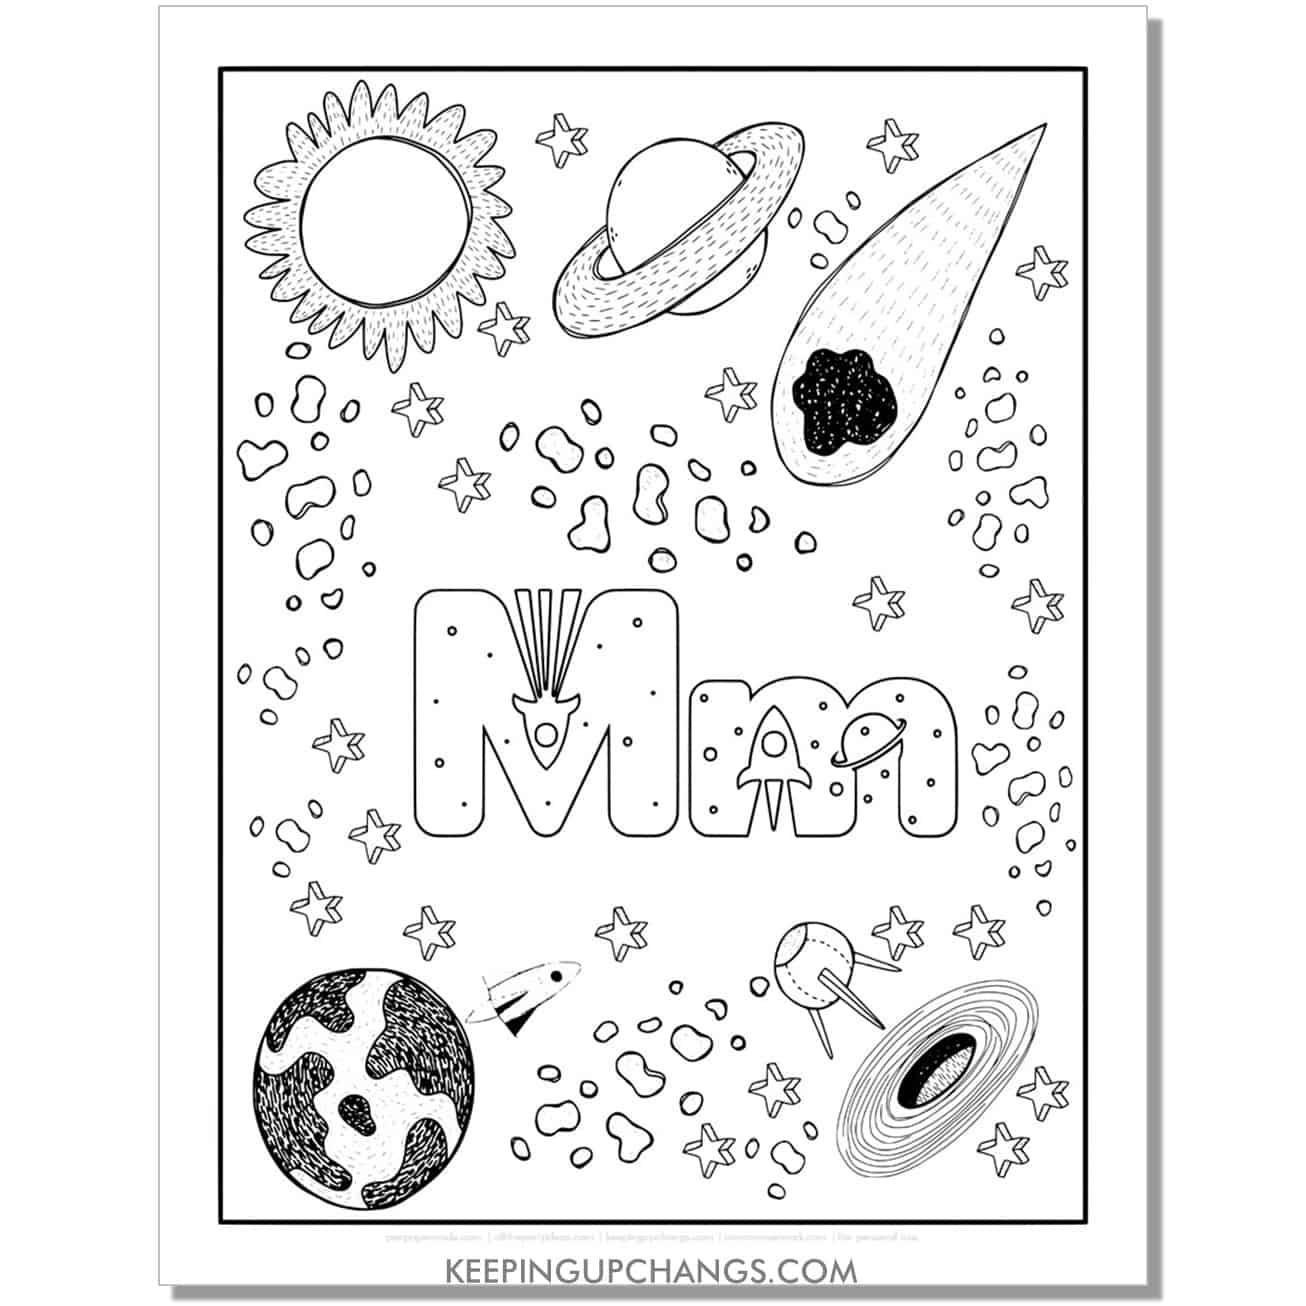 free alphabet letter m coloring page for kids with rockets, space theme.